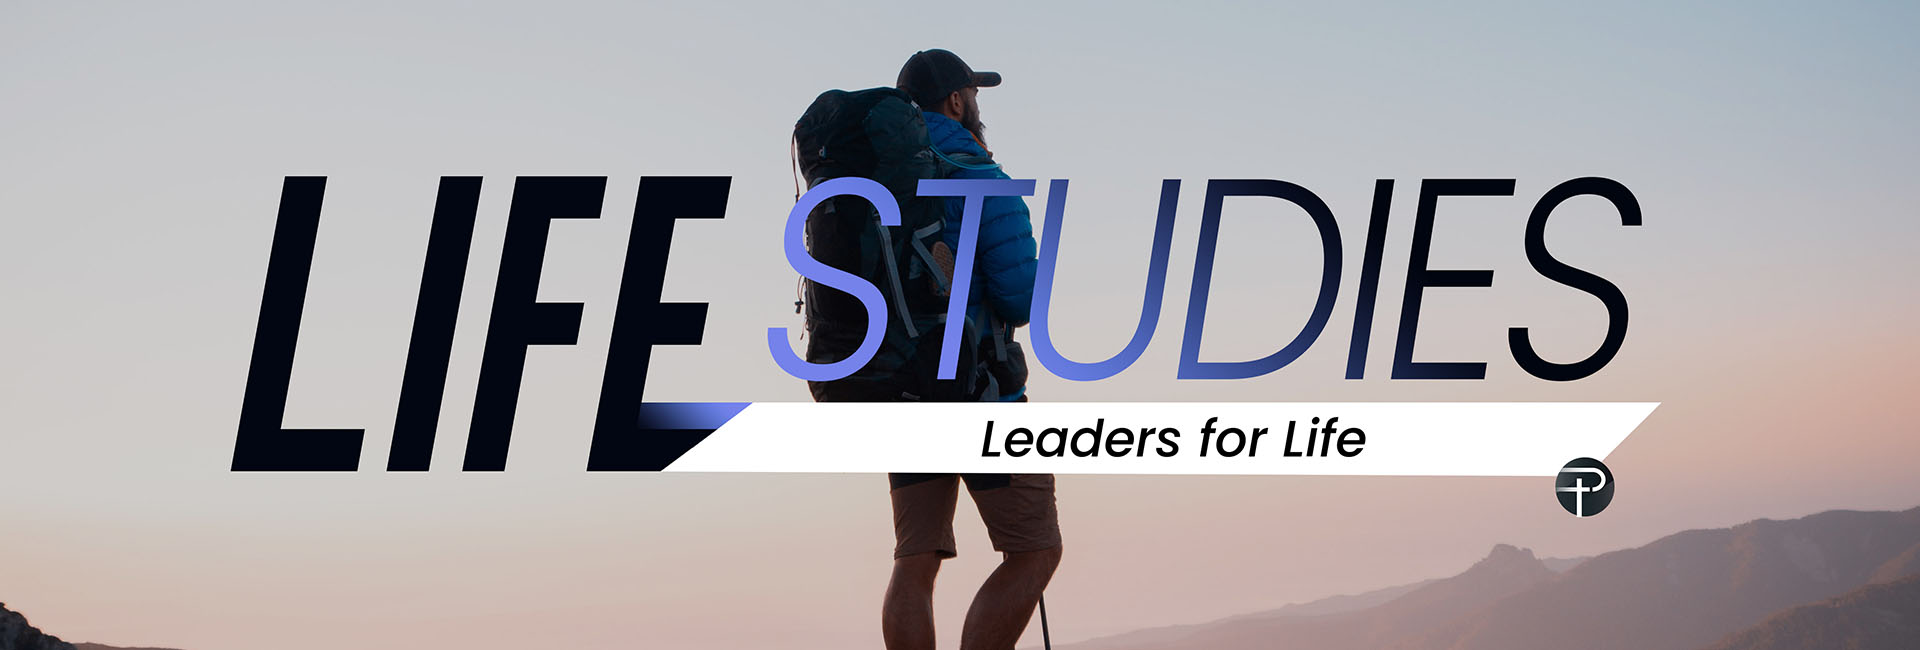 Leaders for Life study_